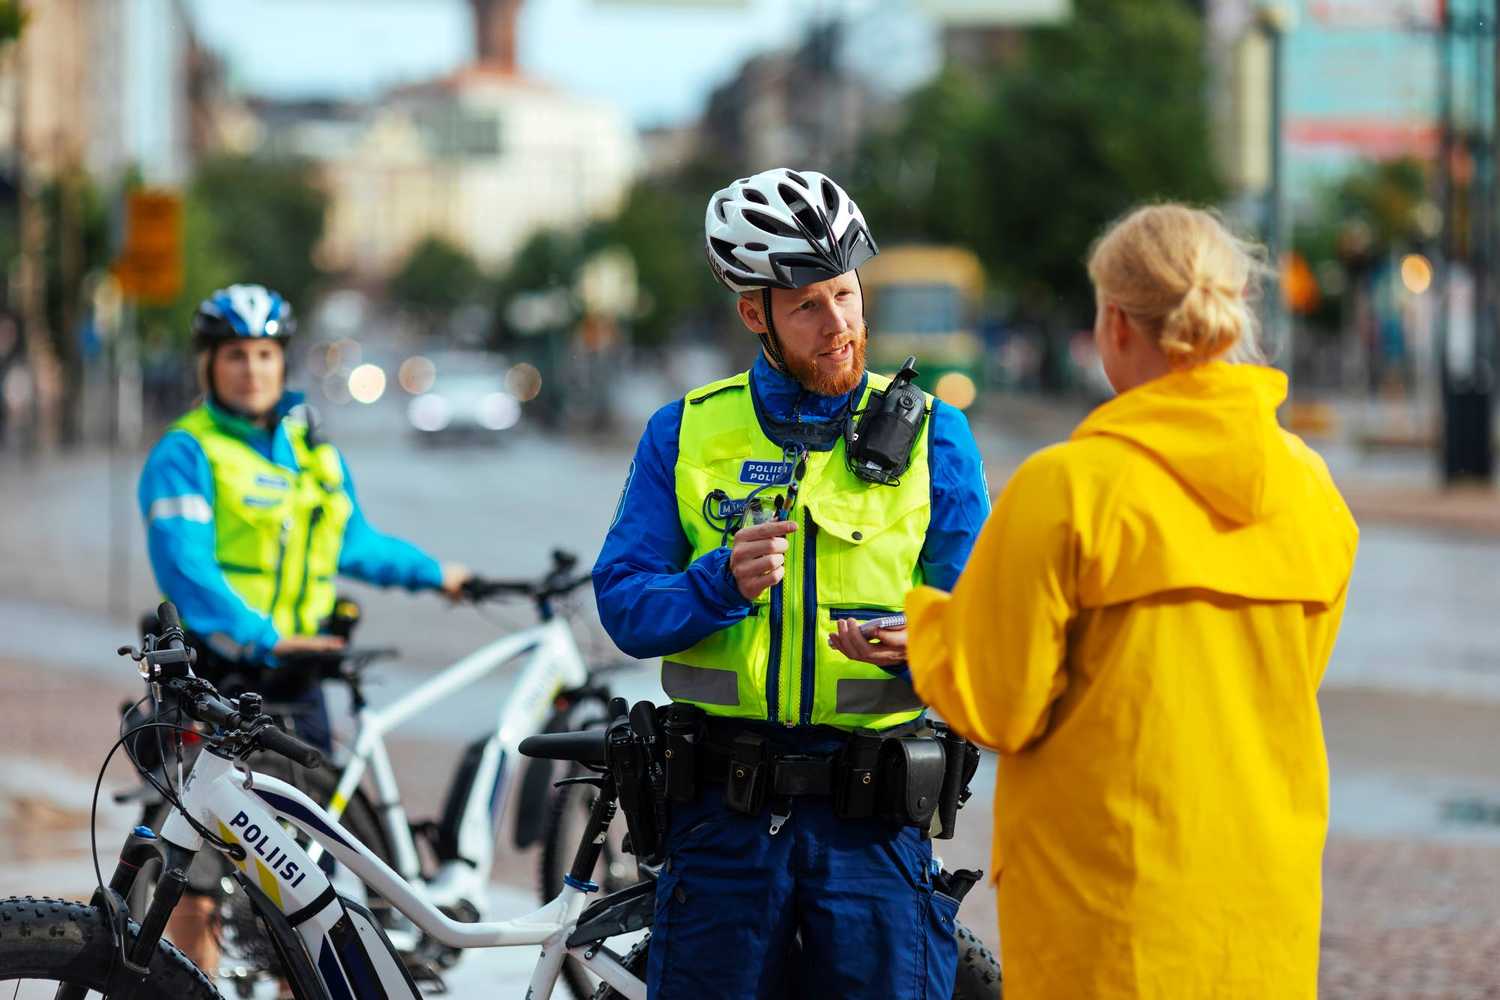 A bicycle policeman talks to a customer wearing a yellow jacket. The policeman is holding a pen and a pad. In the background, another policeman leans on his bike.